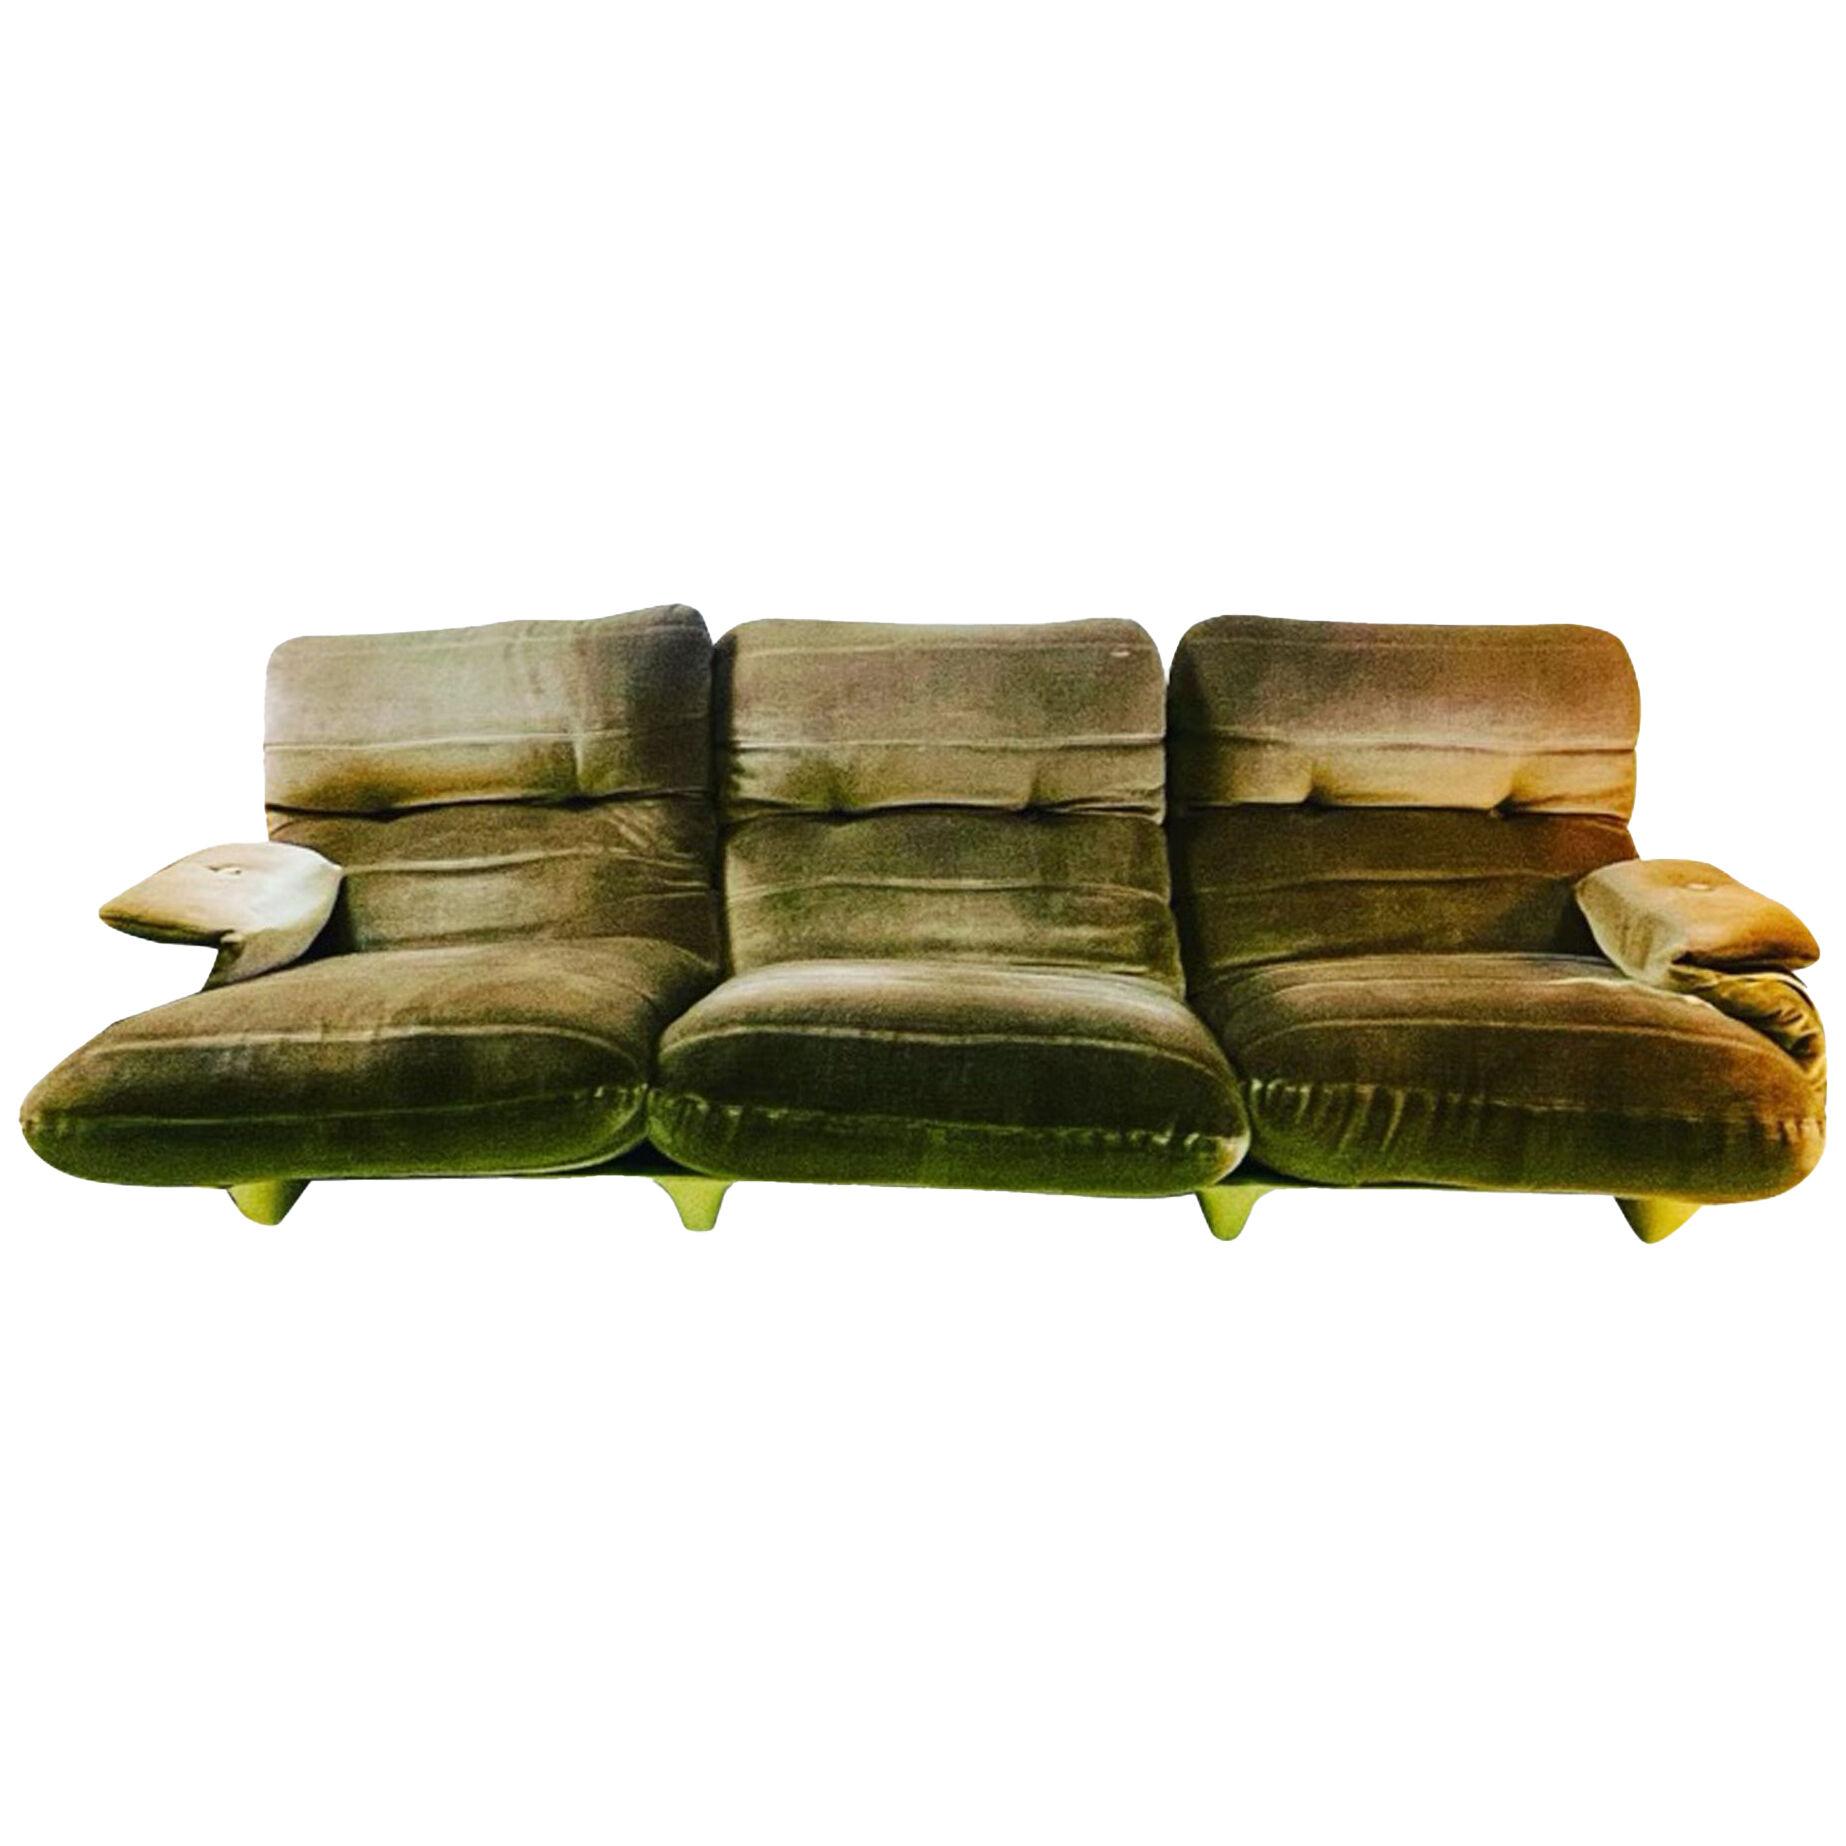 EXCEPTIONAL RARE FRENCH MODERNIST PERSPEX THREE SEAT COUCH BY MICHEL DUCAROY